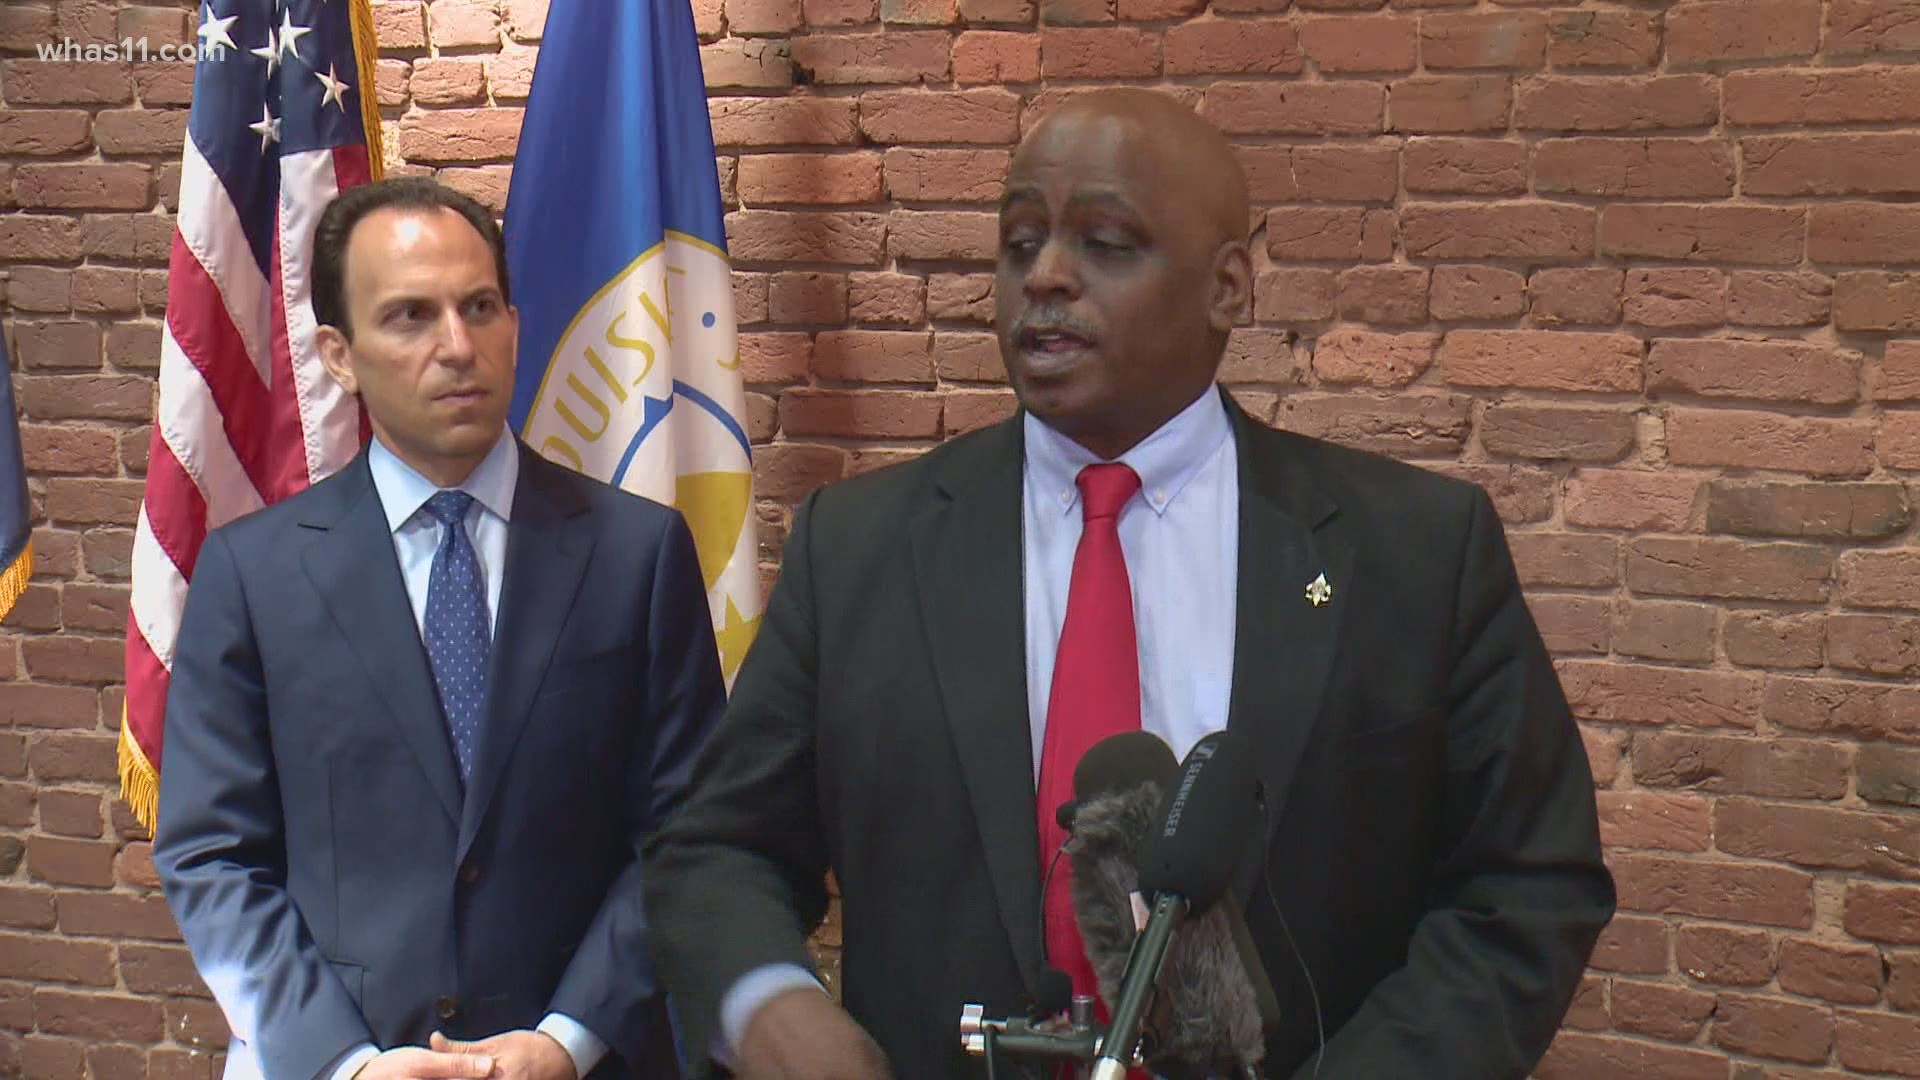 Metro Council President David James has endorsed Craig Greenberg in the 2022 Louisville mayoral race.